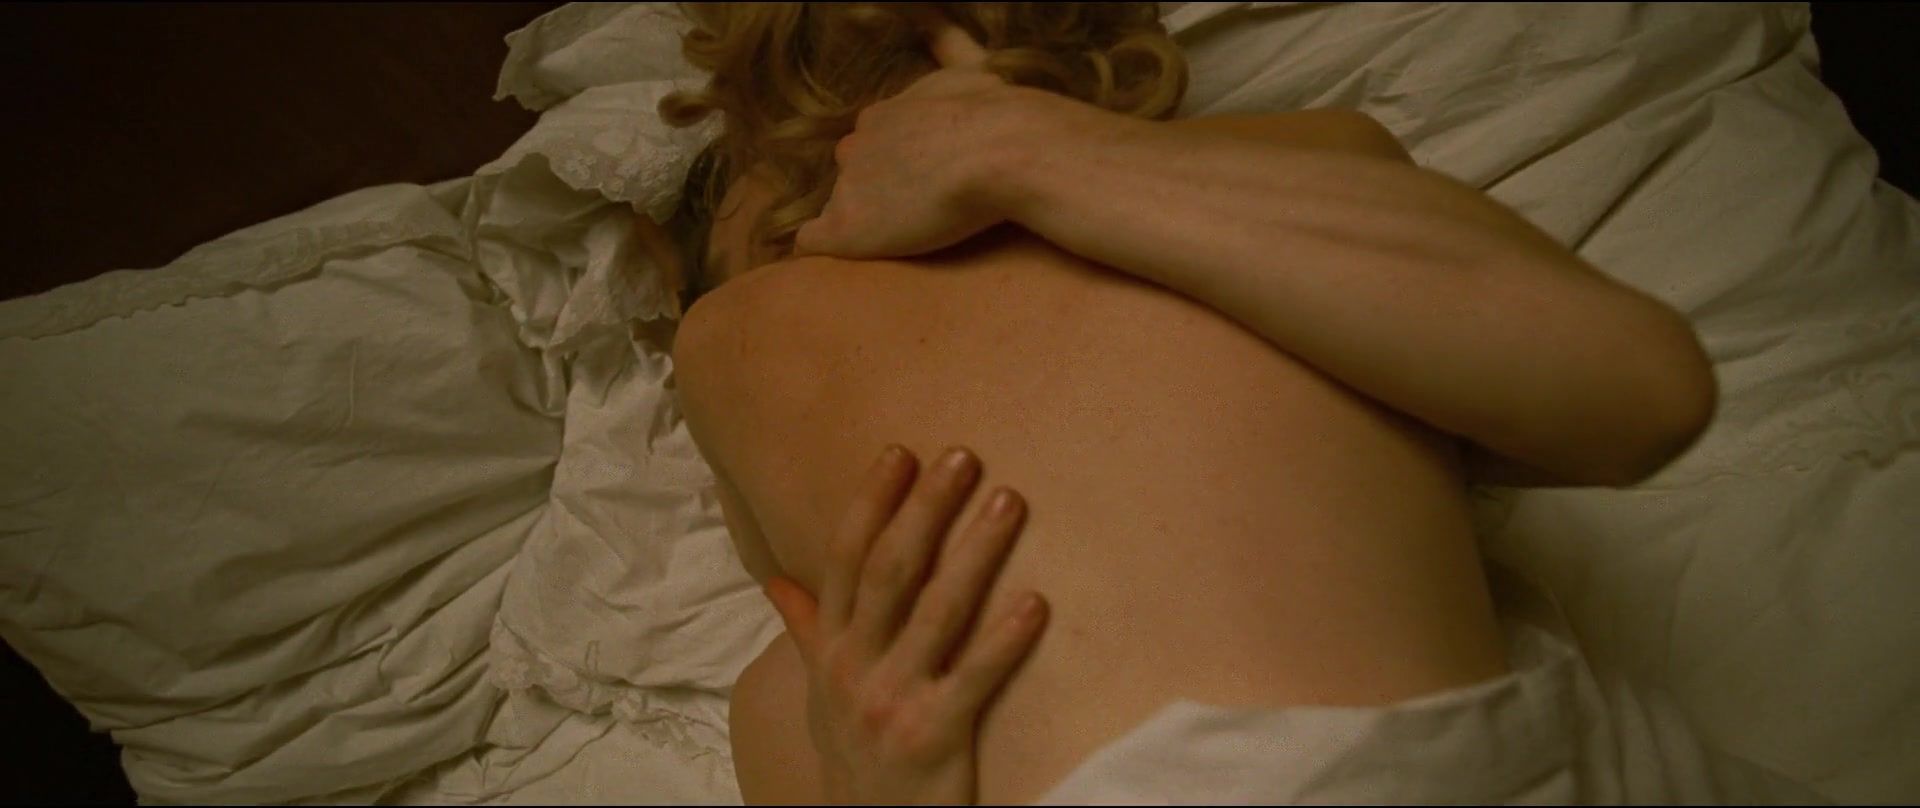 AdFly Rosamund Pike, Mia Wasikowska Nude - The Man with the Iron Heart (2017) Blowjobs